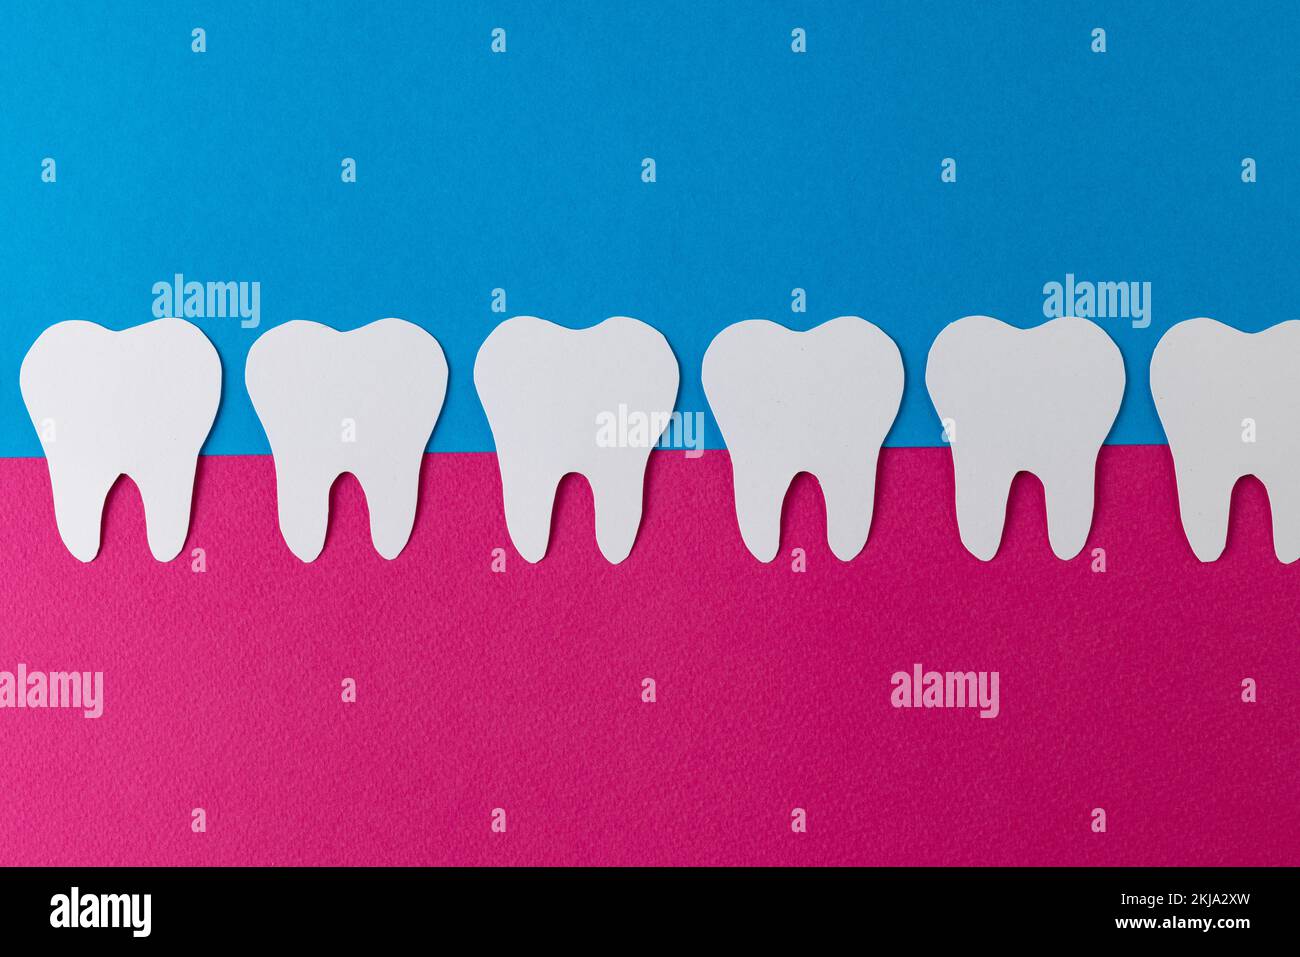 Composition of row of white teeth in pink gum on blue background, with copy space Stock Photo